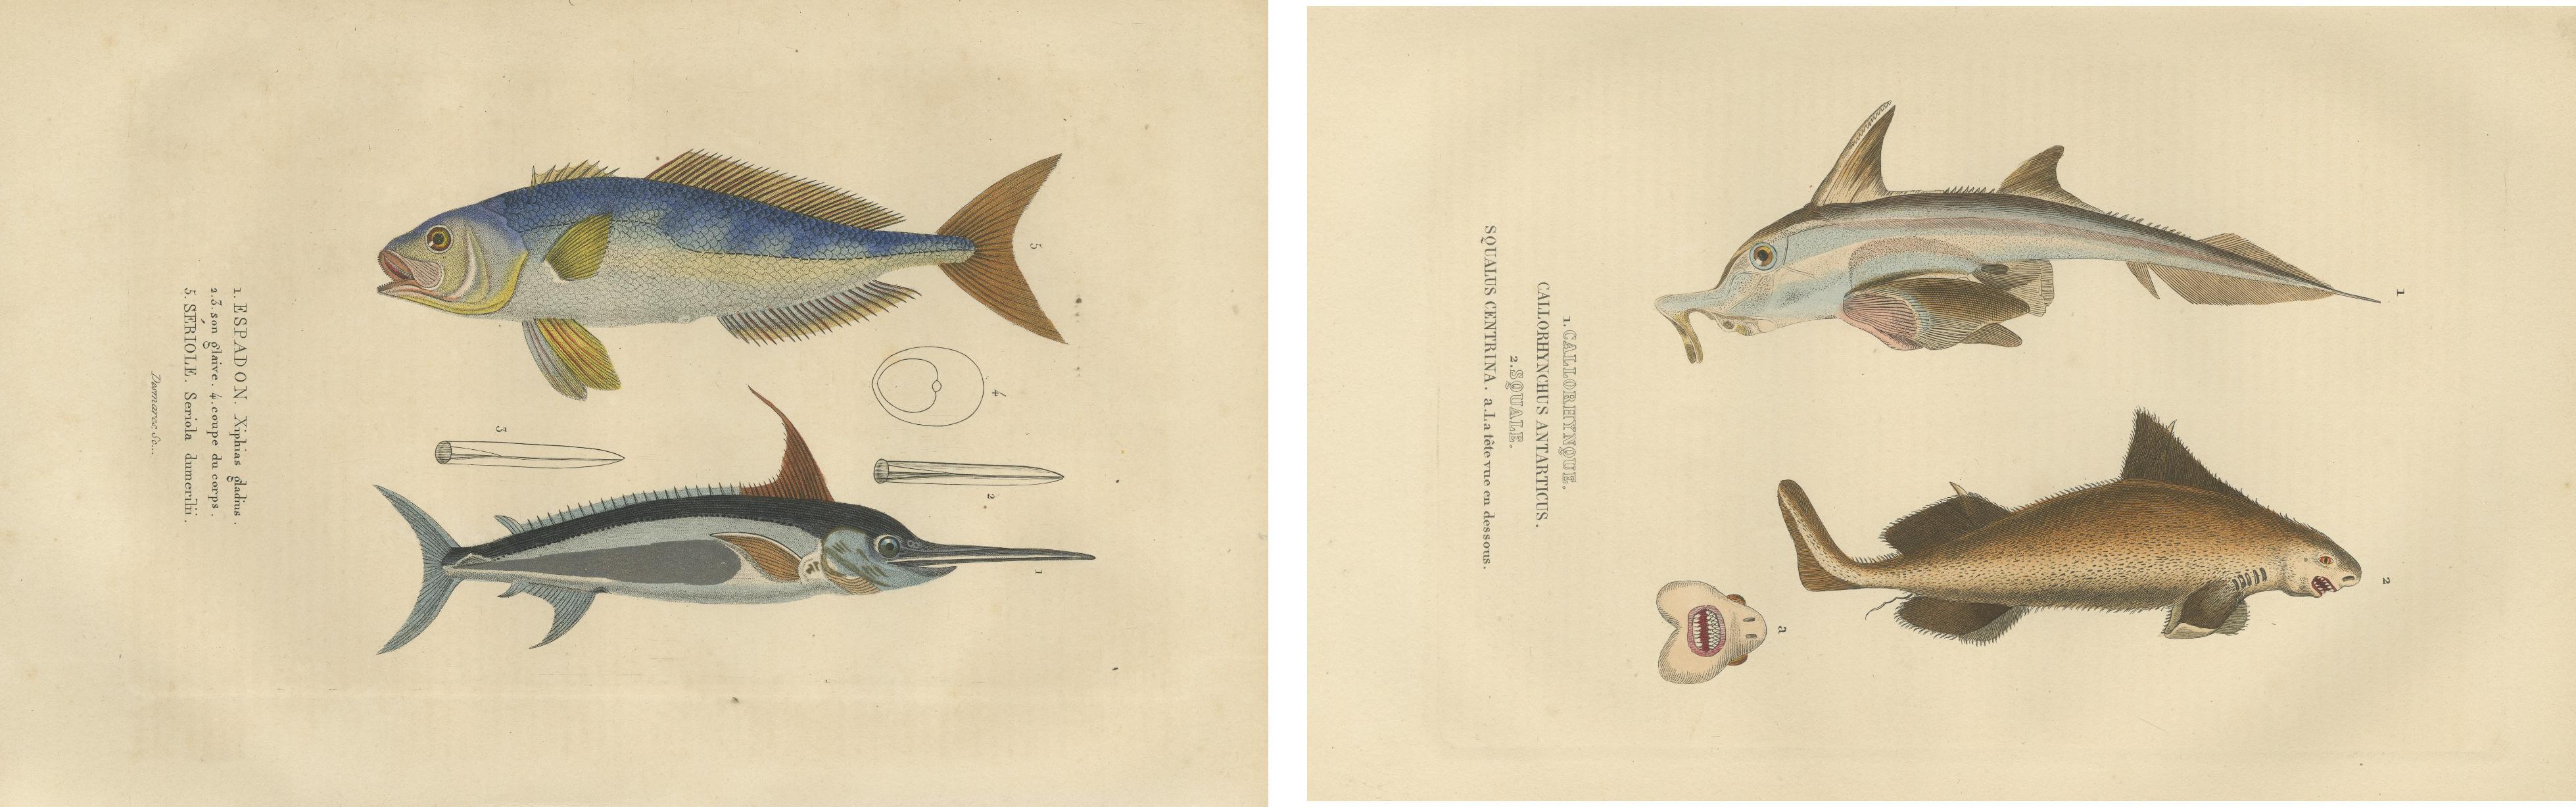 Marine Majesty: Swordfish & Sealife Engravings in Old Handcoloring, 1845 In Good Condition For Sale In Langweer, NL